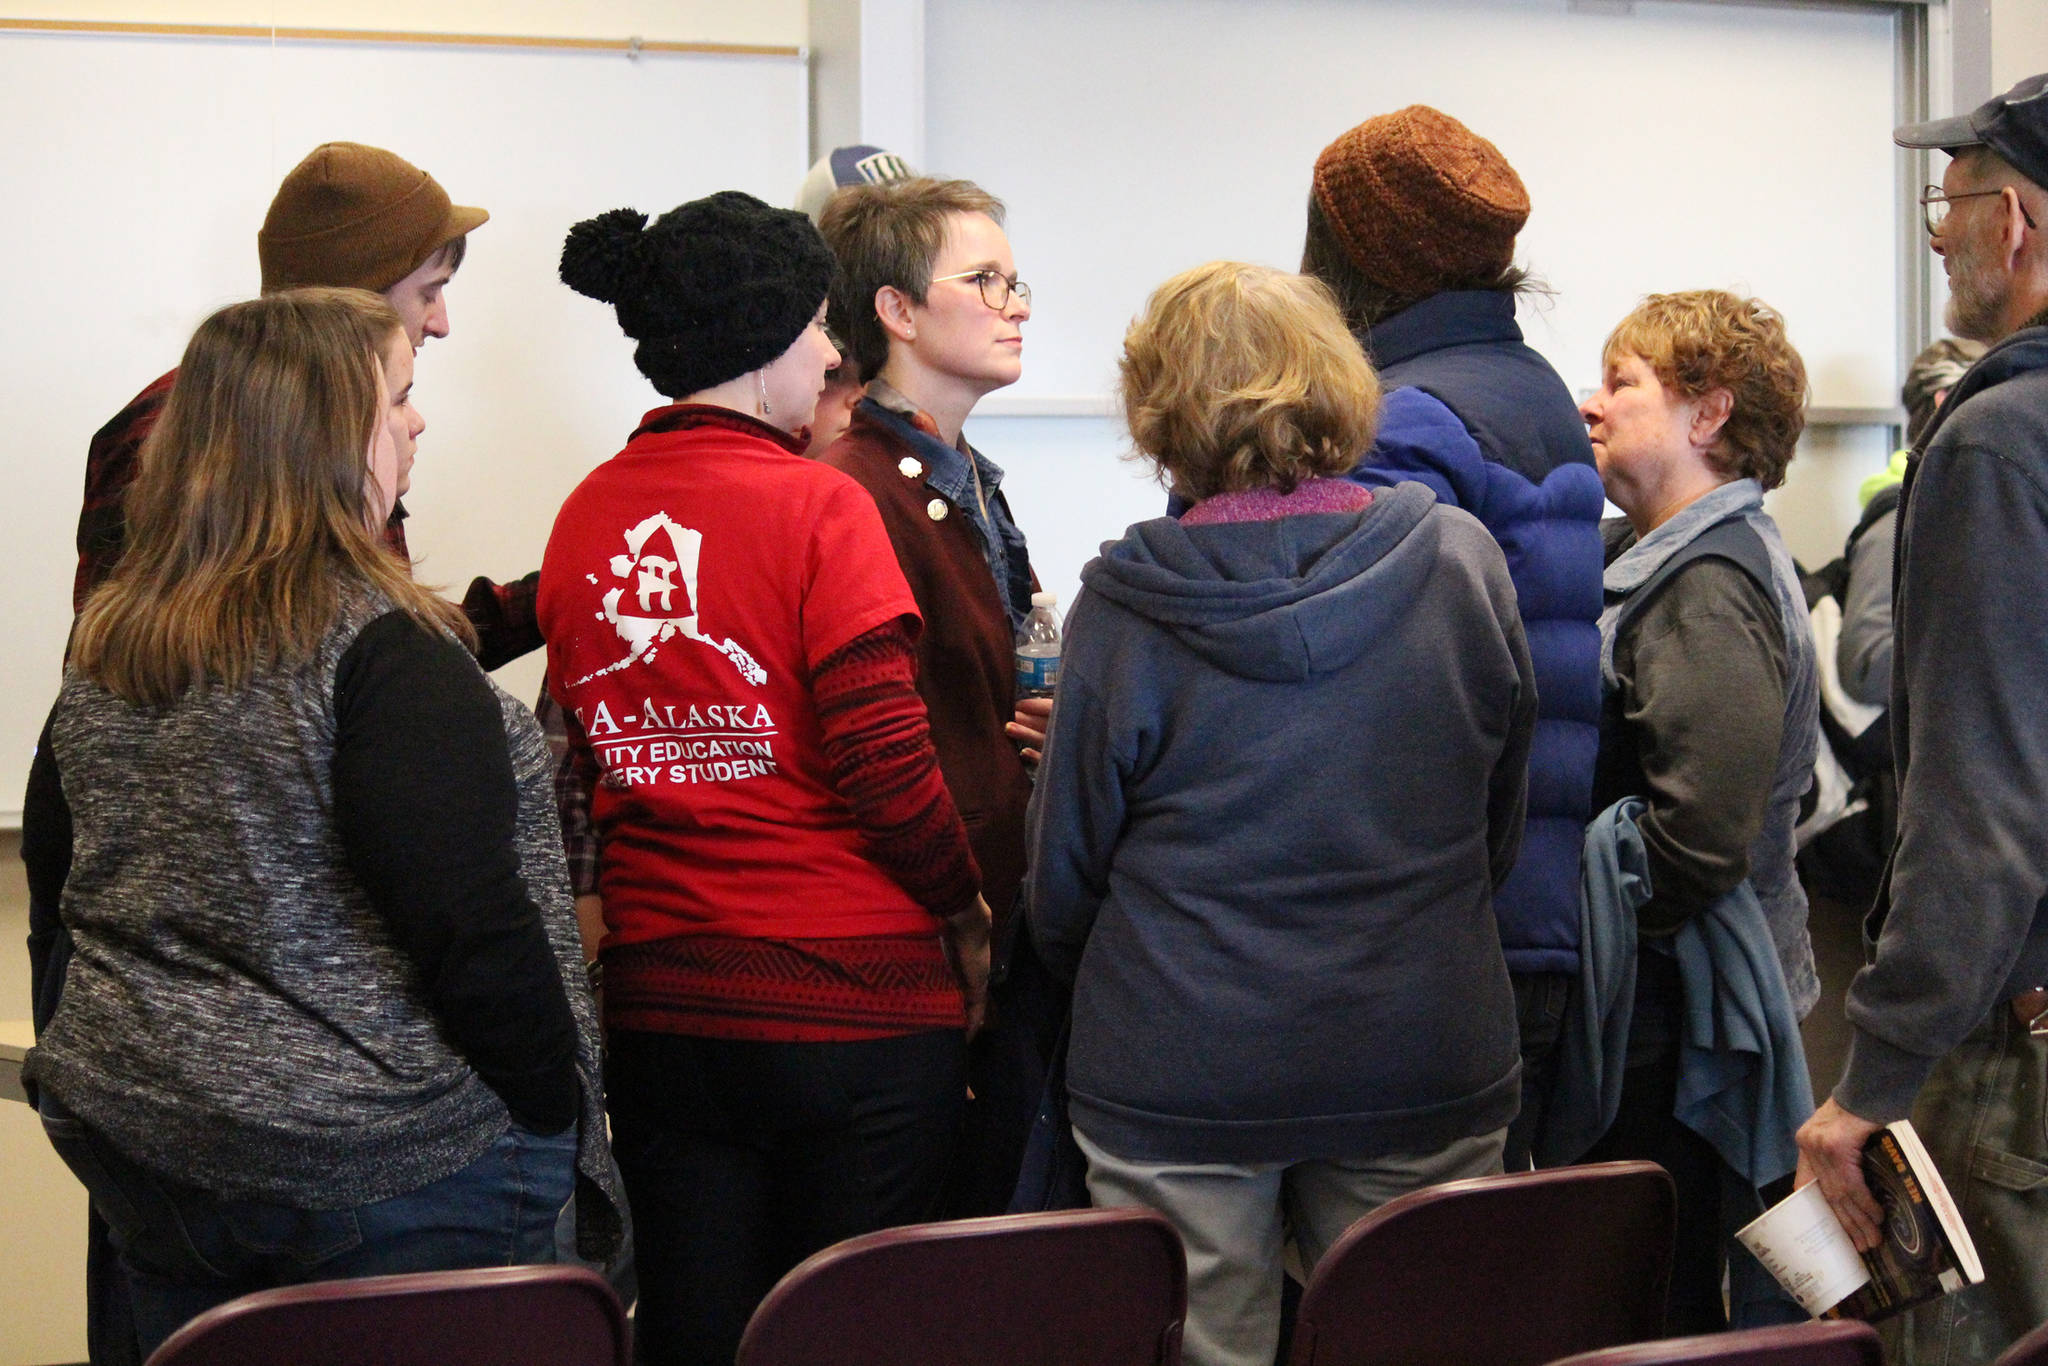 Rep. Sarah Vance (R-Homer) is surrounded by community members just after her town hall meeting Saturday, March 2, 2019 at Kachemak Bay Campus in Homer, Alaska. (Photo by Megan Pacer/Homer News)